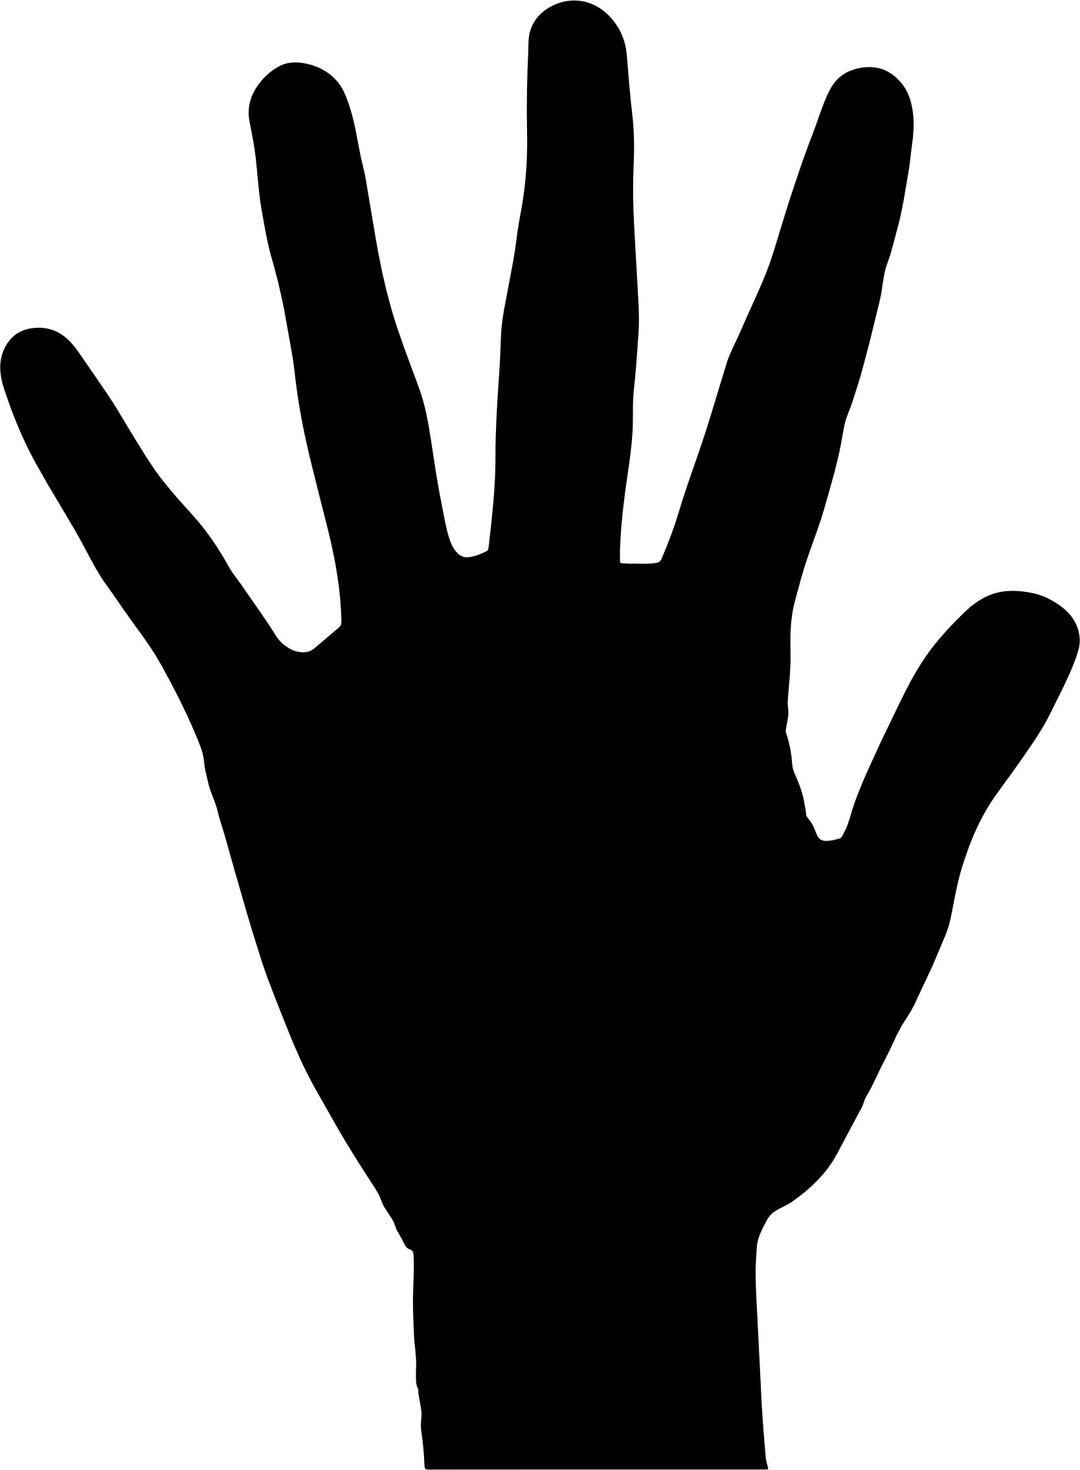 Hand silhouette png transparent